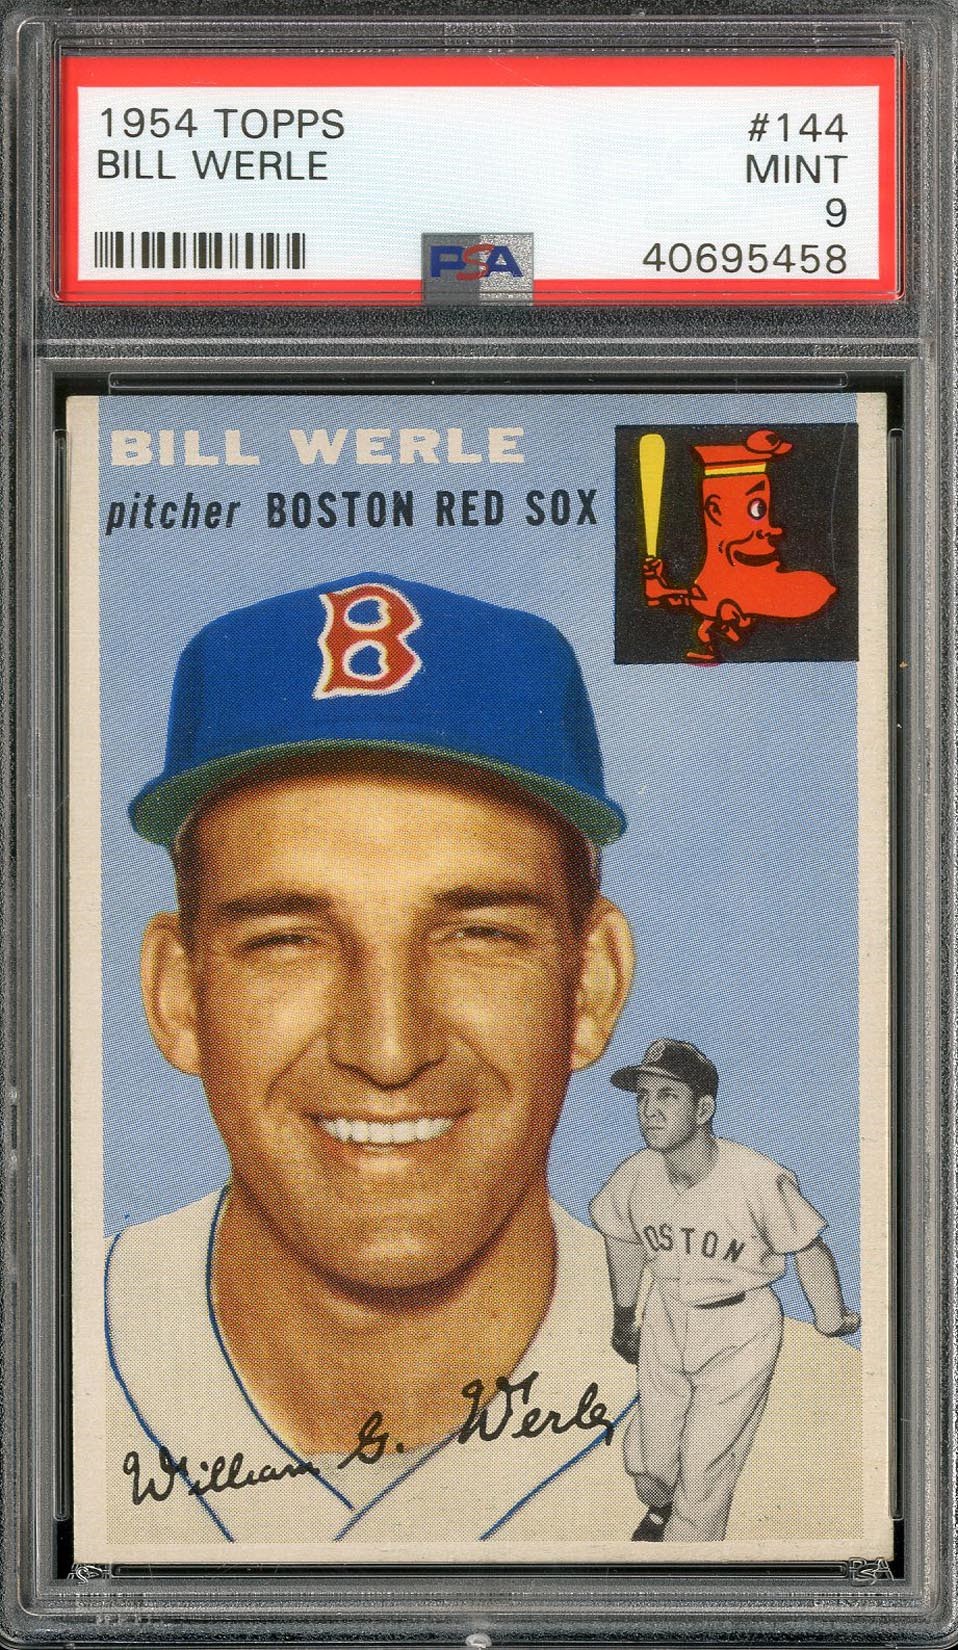 Baseball and Trading Cards - 1954 Topps #144 Bill Werle - PSA MINT 9